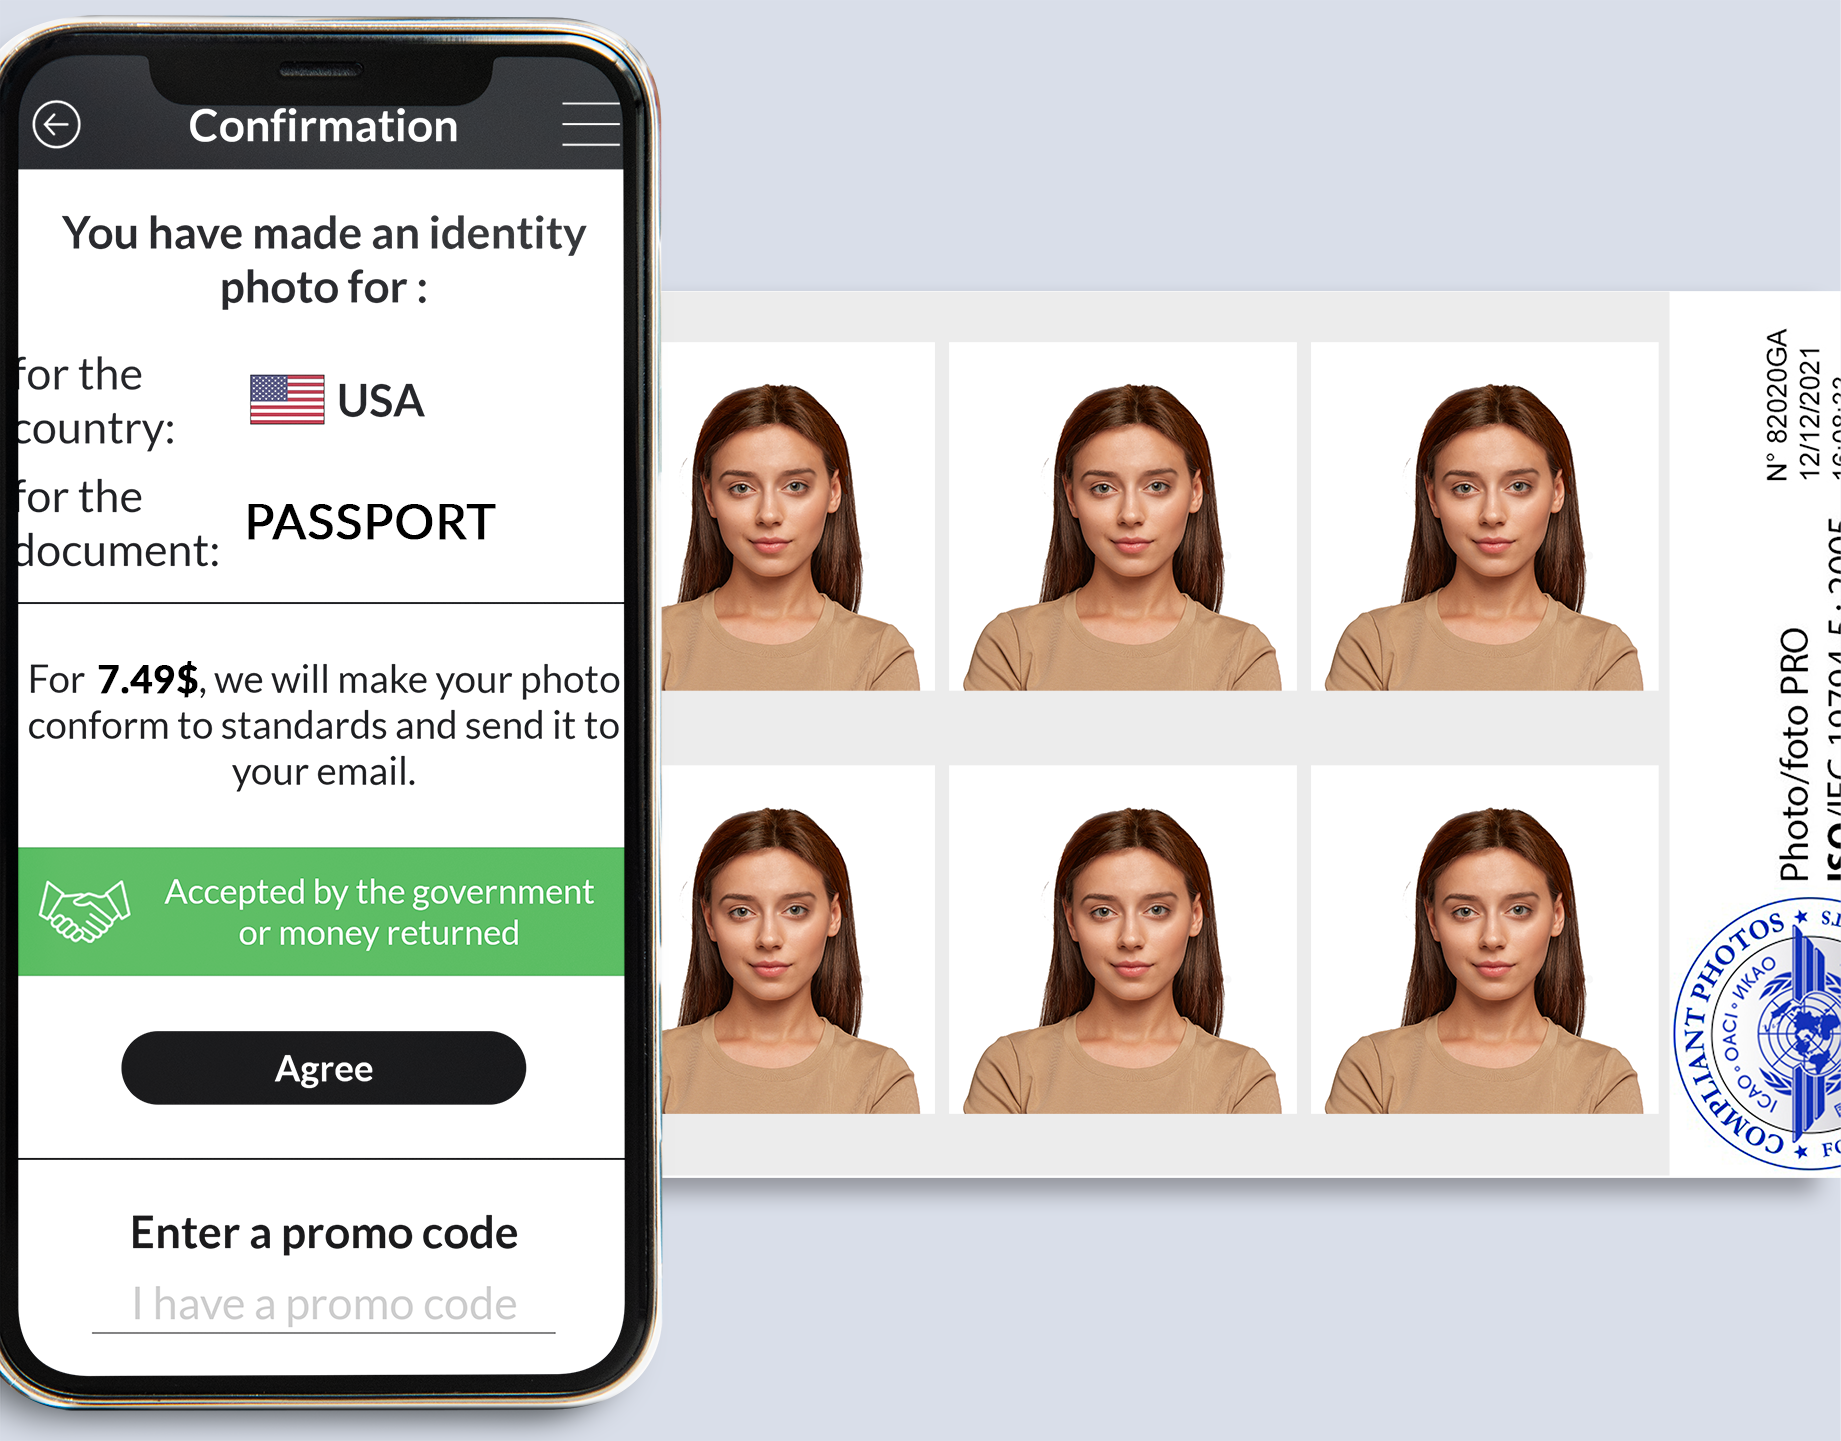 What is the best hairstyle for a US passport photo? - Smartphone ID